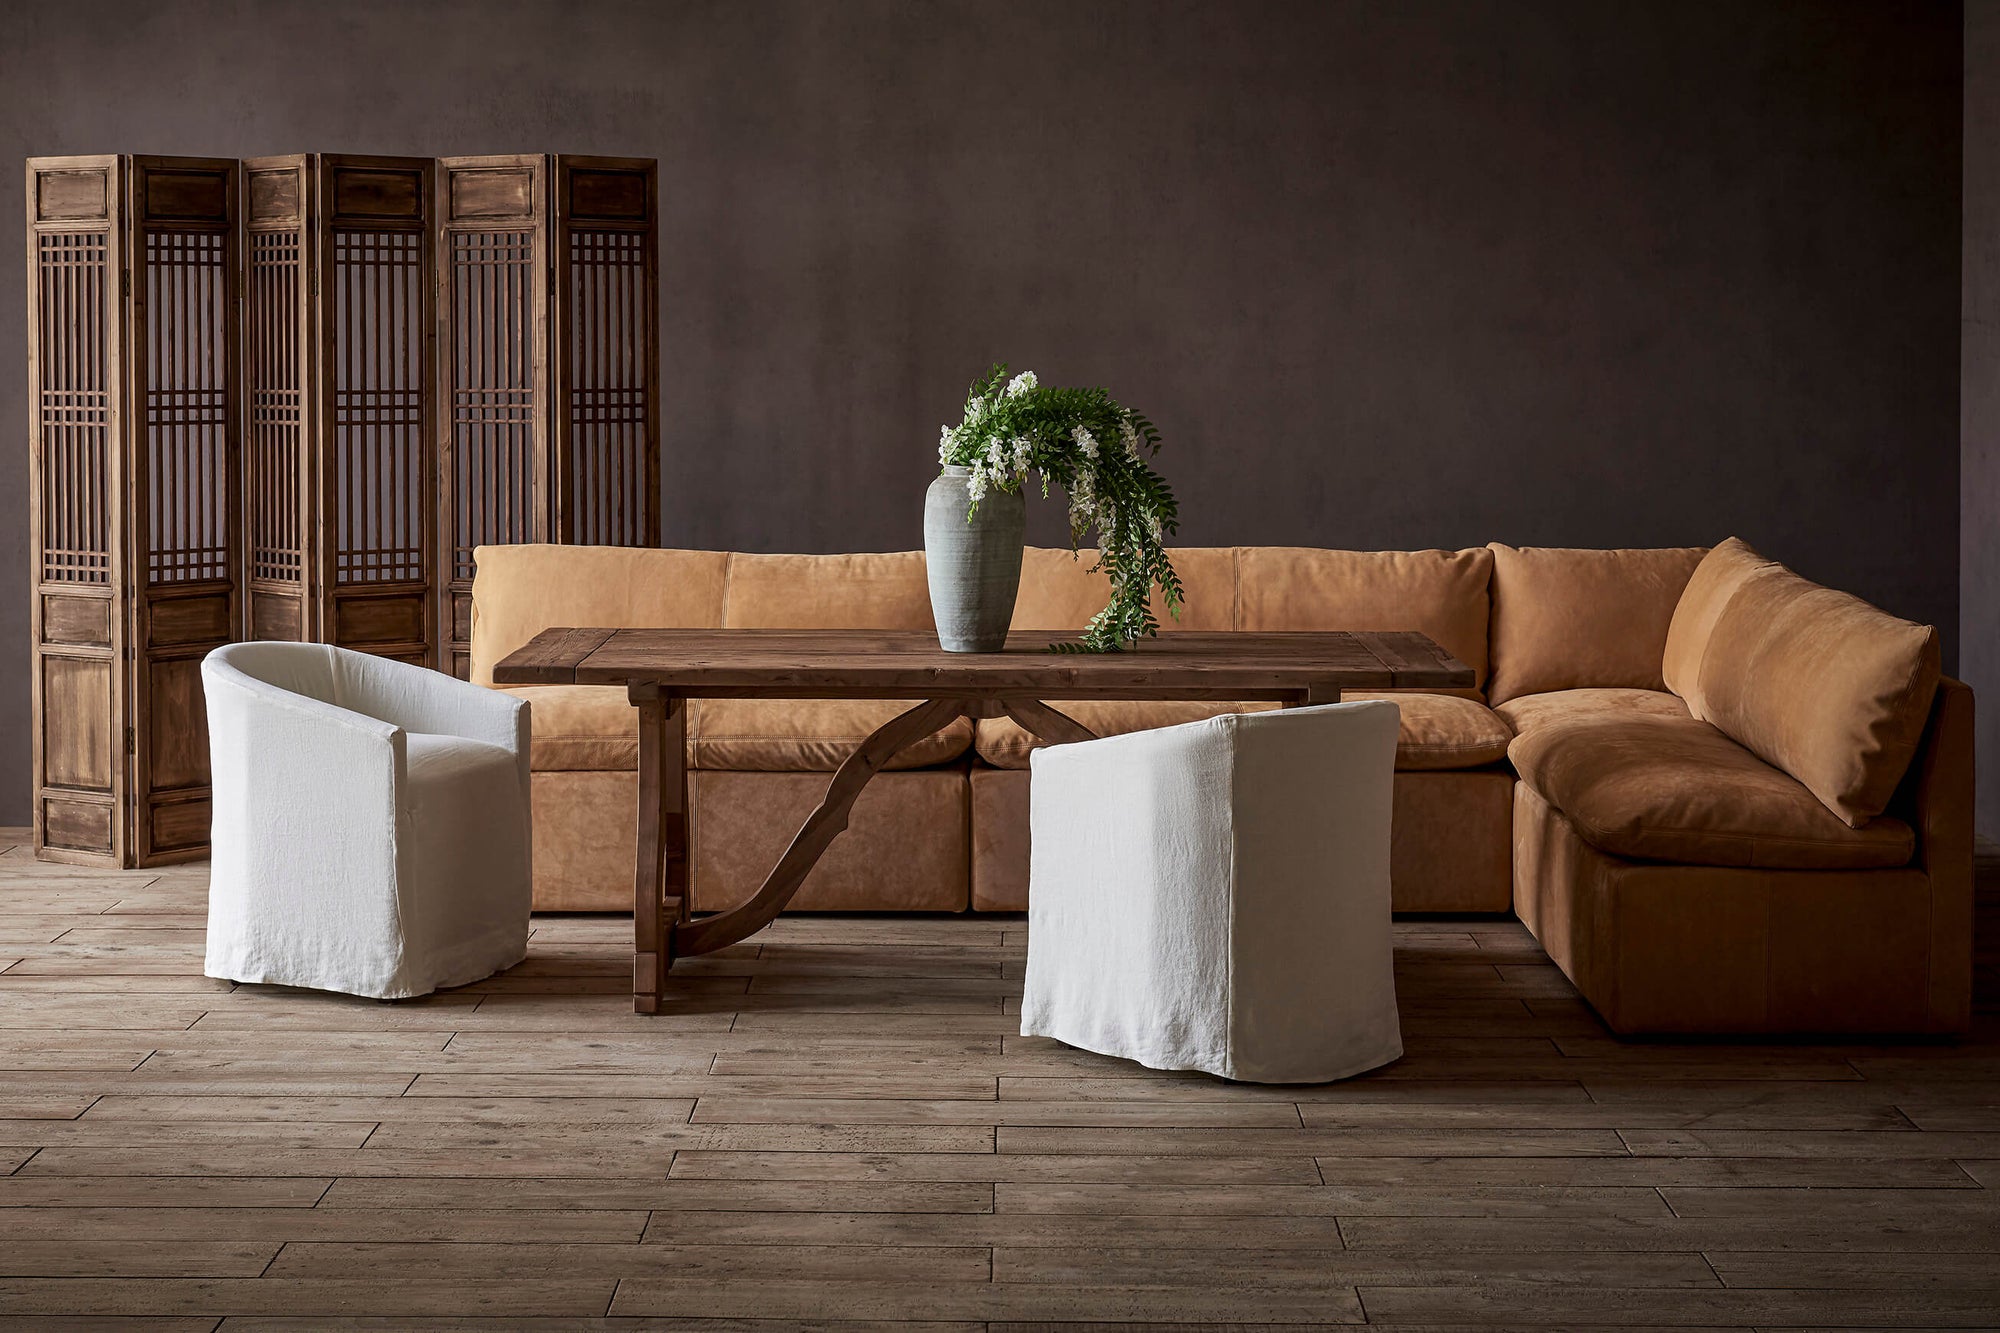 Aria Leather Banquette in Mojave Glow, a tan Meridian Leather, placed with two Ziki Dining Chairs around a Leona Dining Table with a vase of flowers